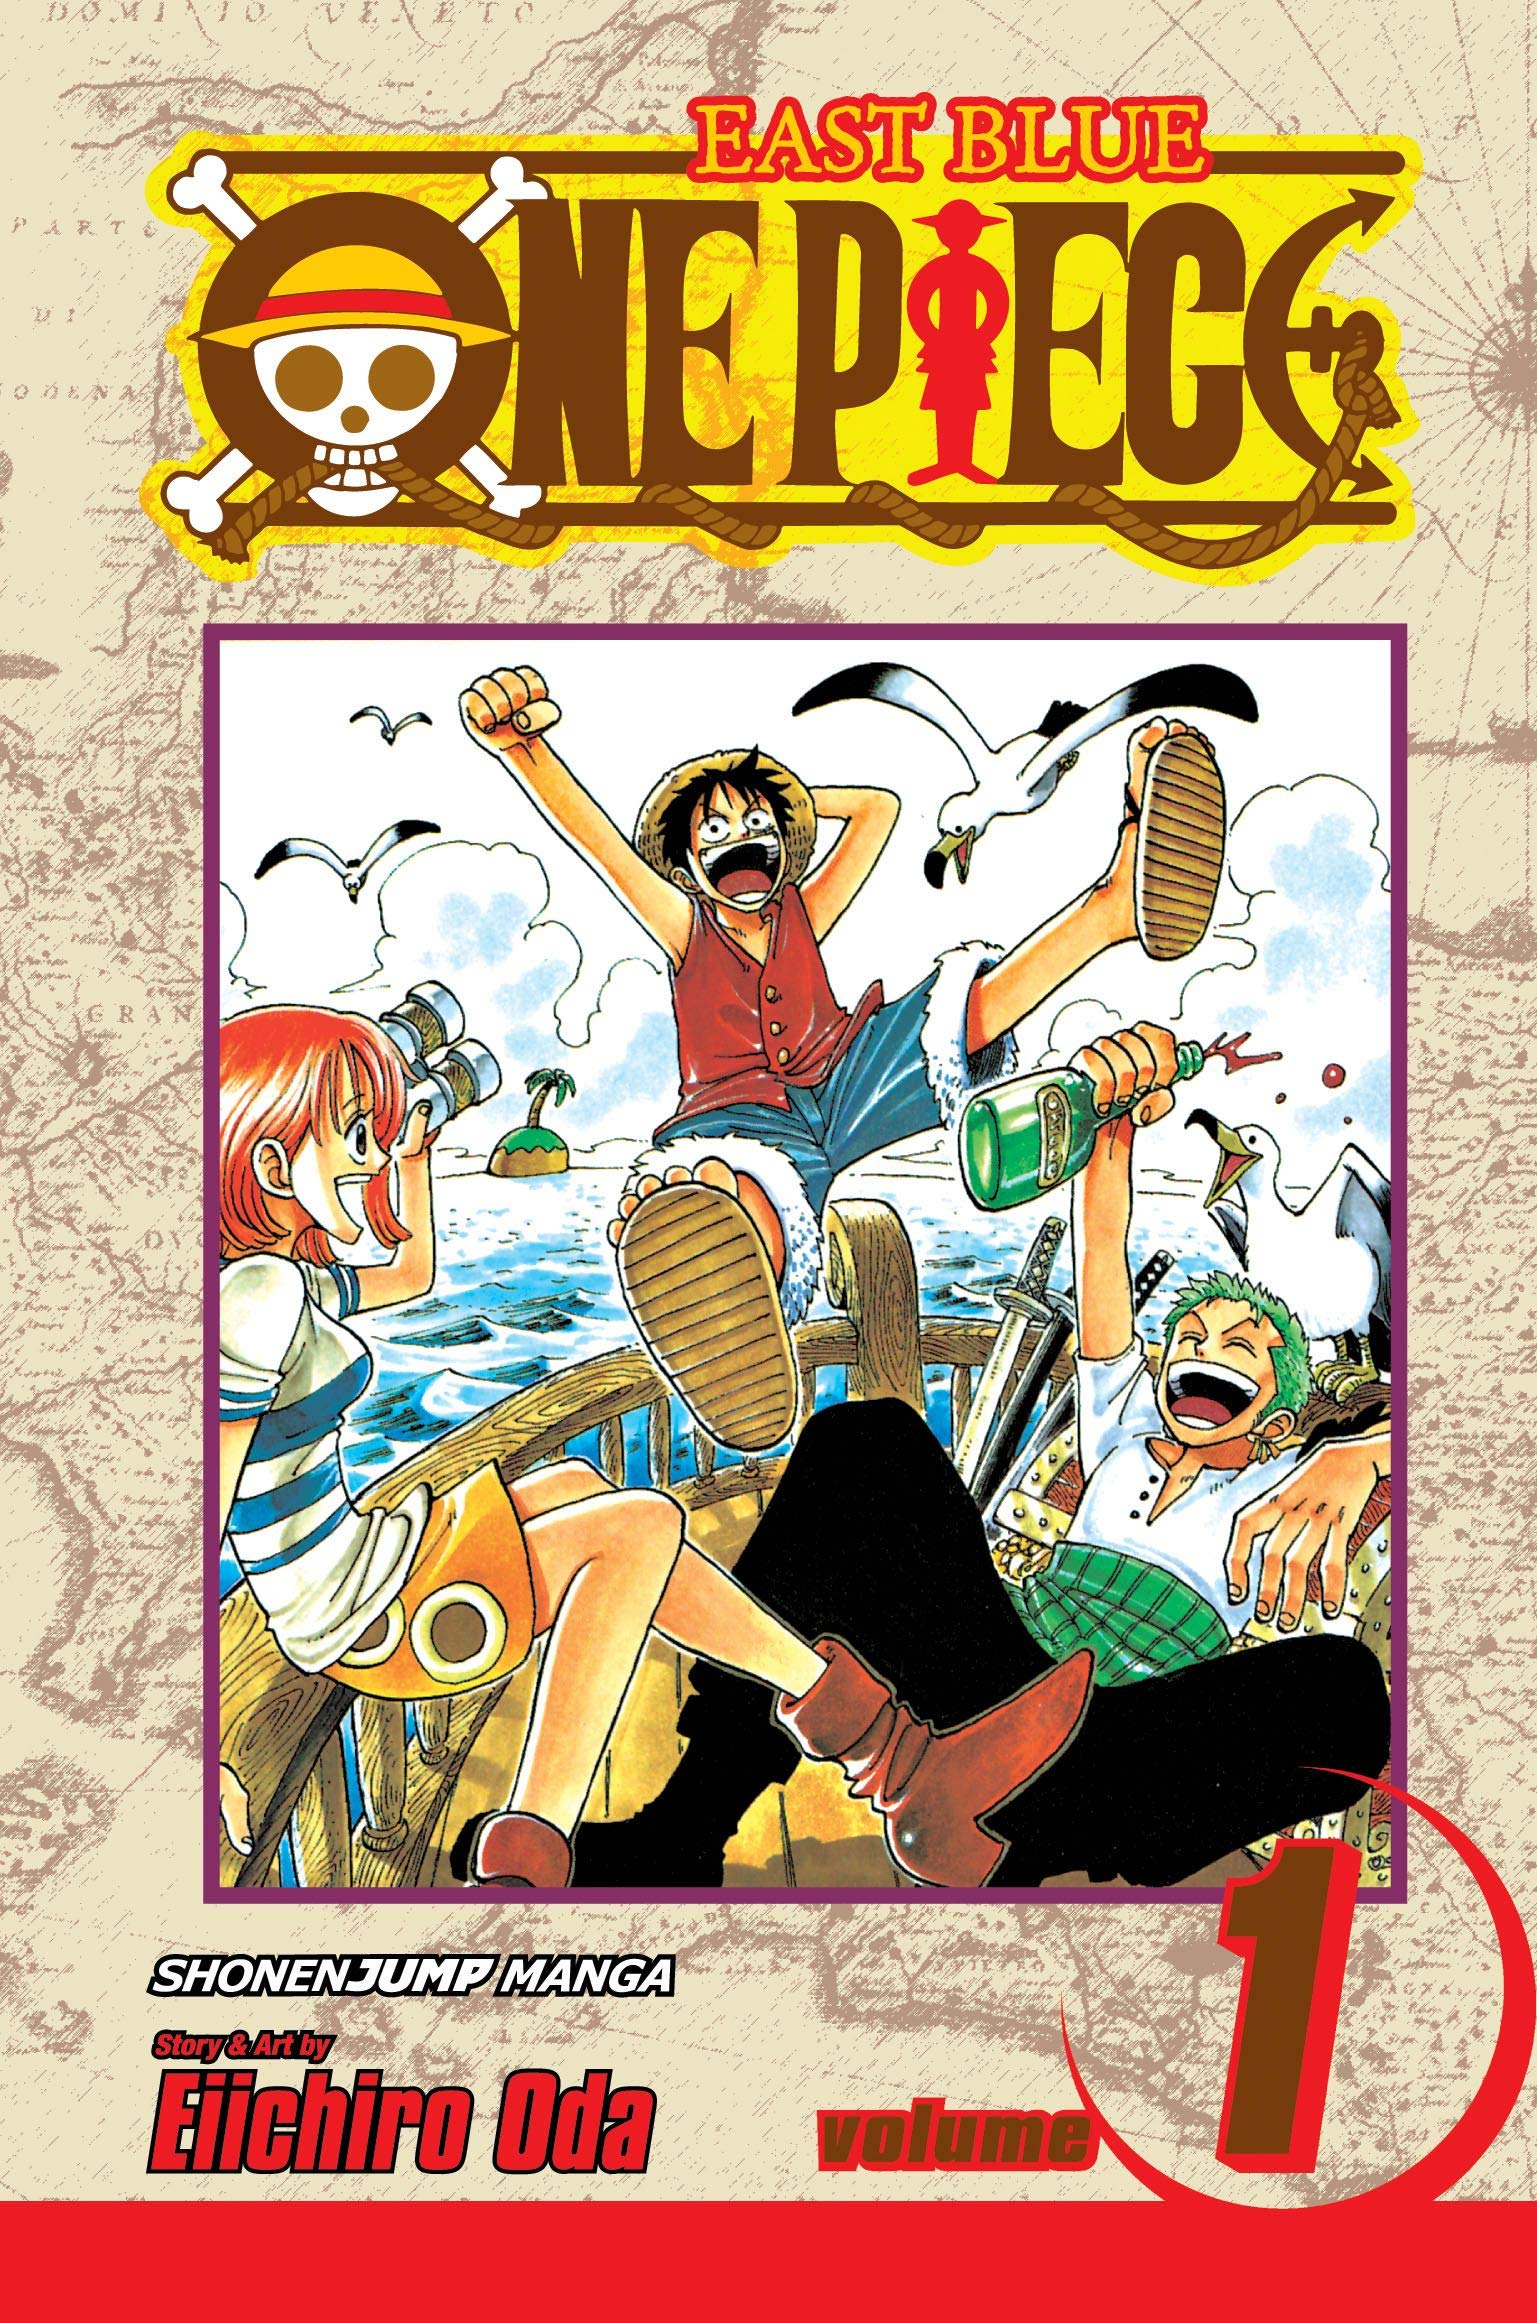 Read Manga Online One Piece Chapter 1023 Release Date, Spoiler and Everything you Need To Know